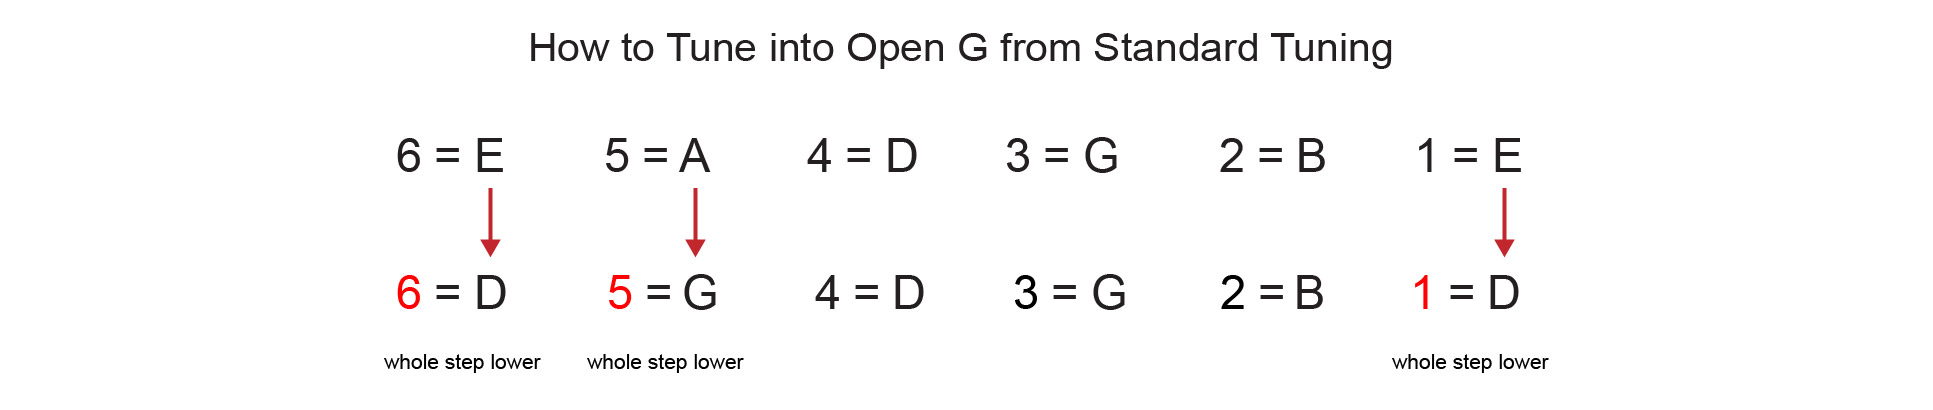 How to tune to Open G guitar tuning